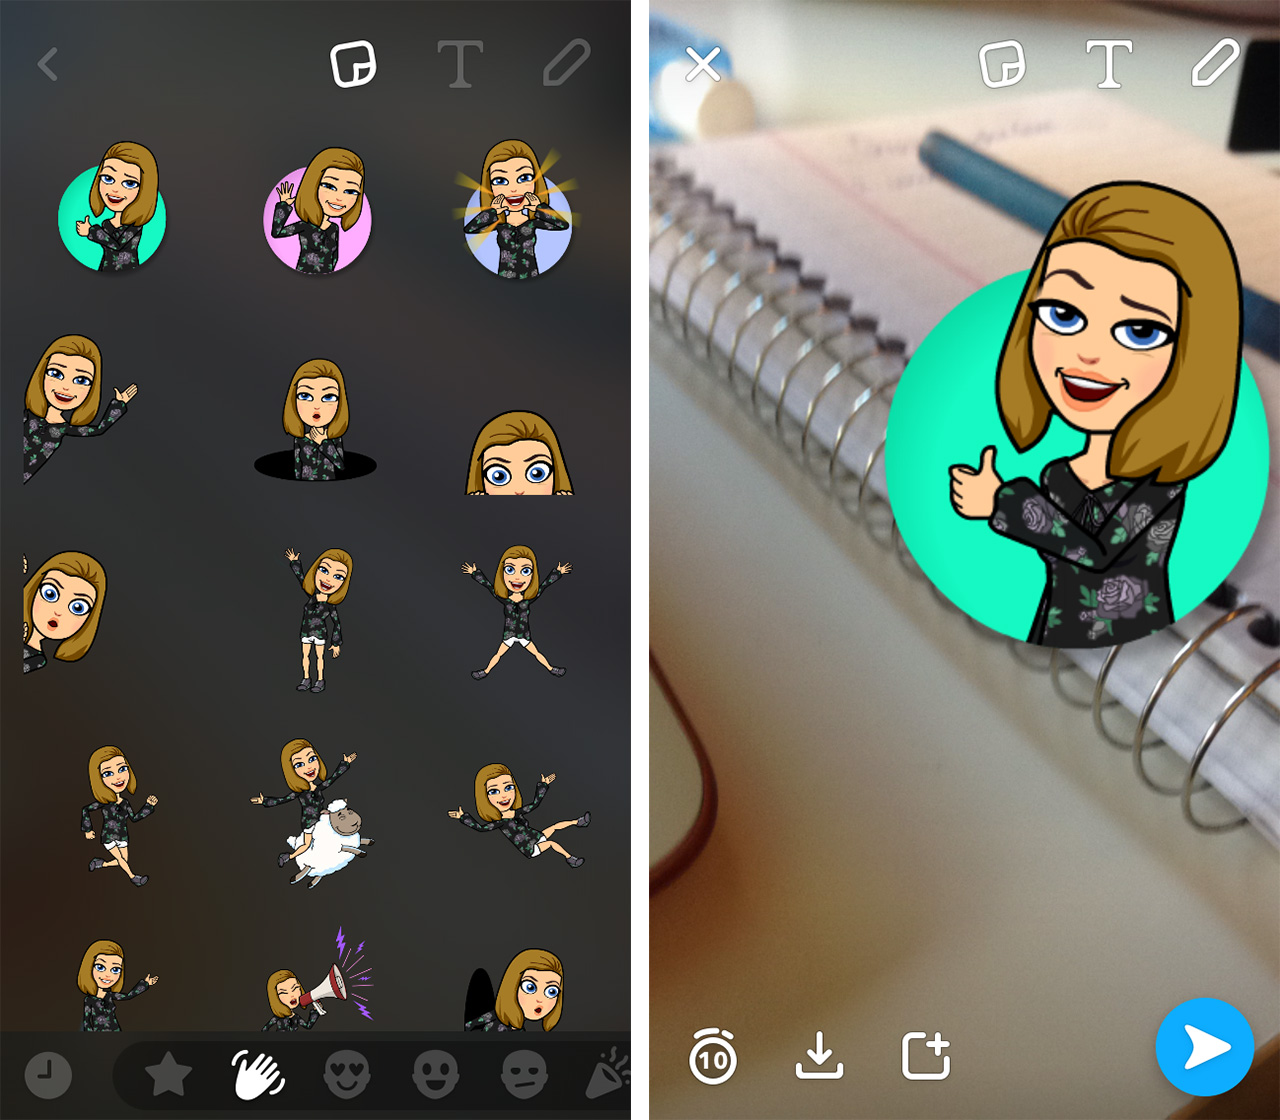 Canadian-made Bitmojis in snaps means your mom now loves Snapchat -  MobileSyrup